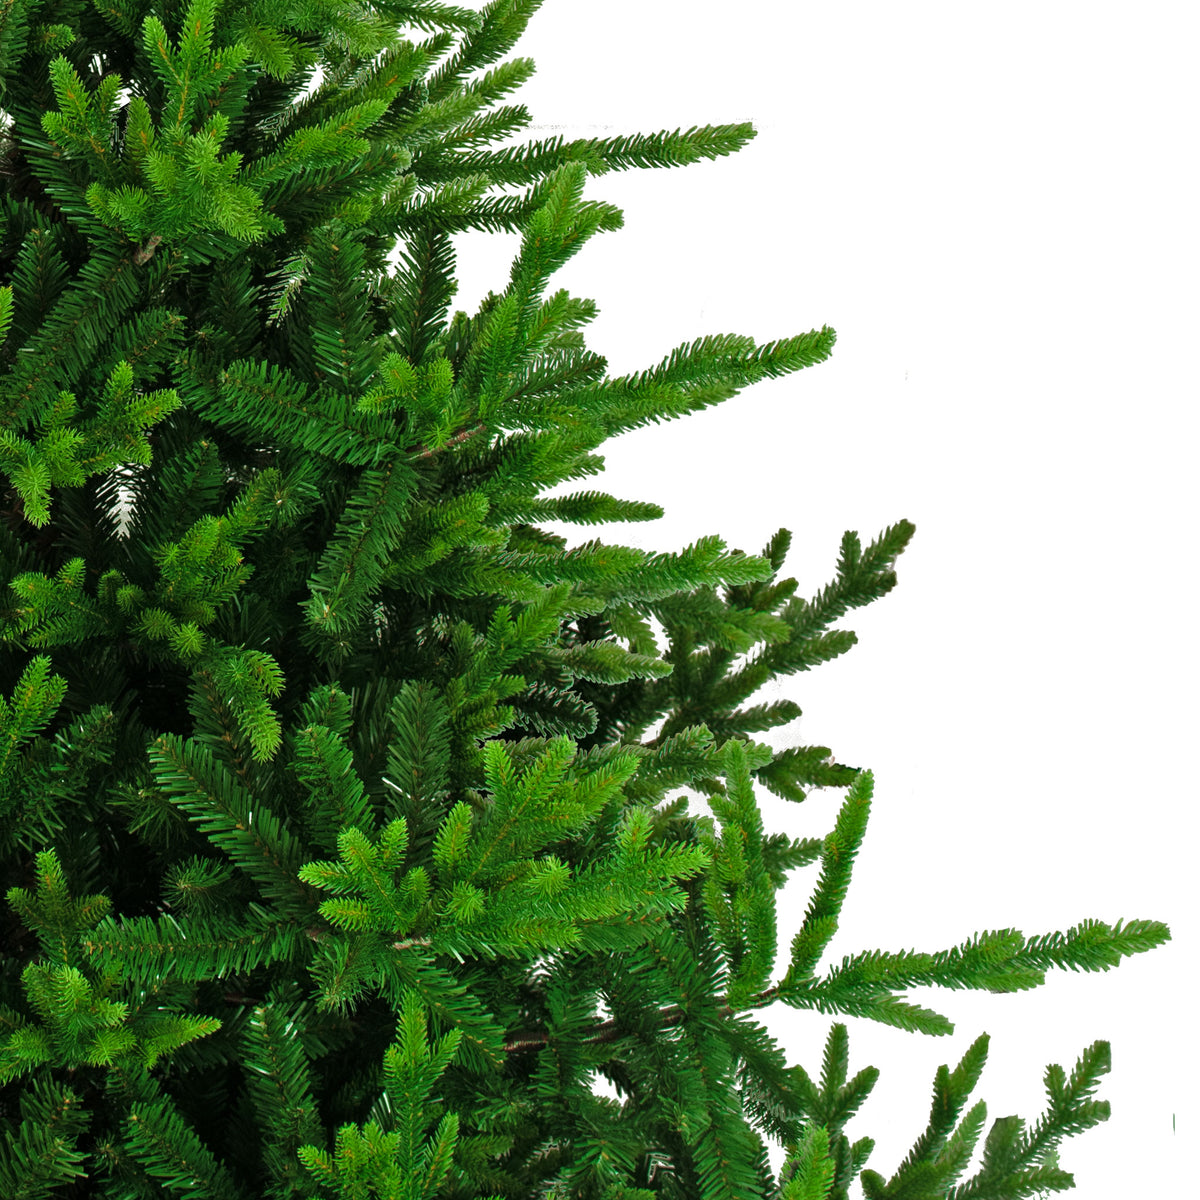 The side branches of the 7FT Tall Noble Christmas Tree with artificial spruce and pine fur branches.